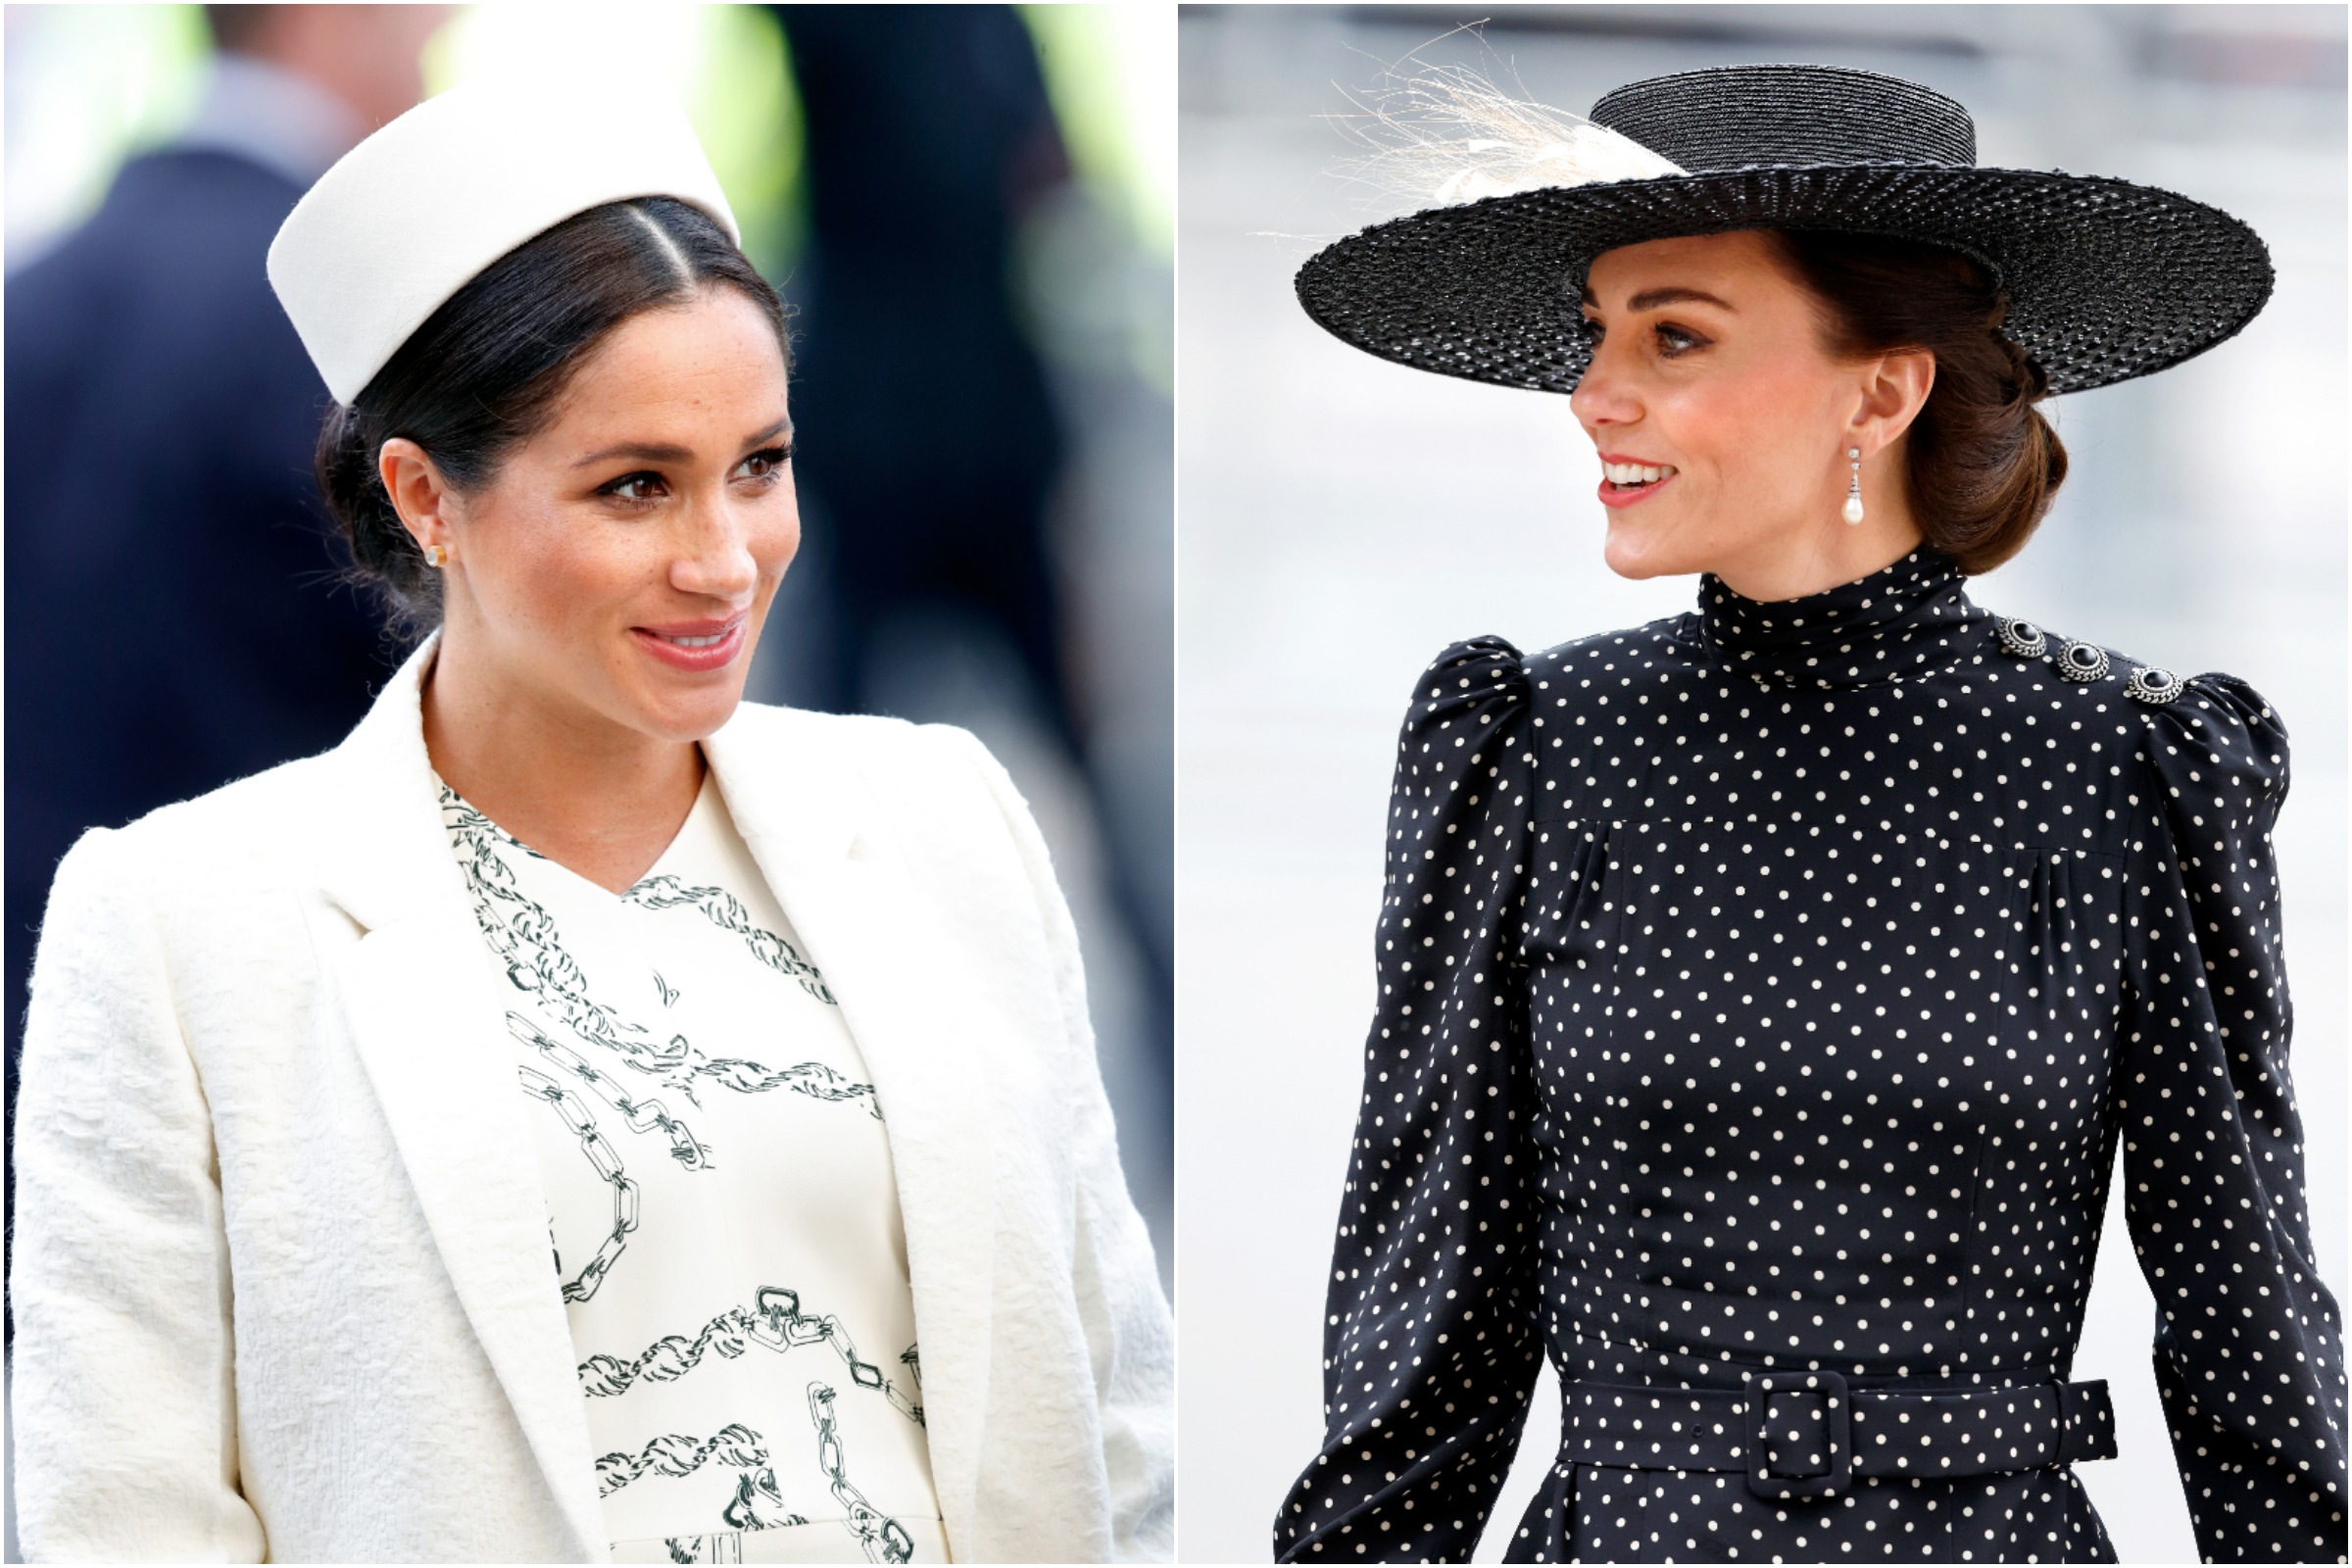 The Royal Wedding Hats You Can Expect to See This Weekend